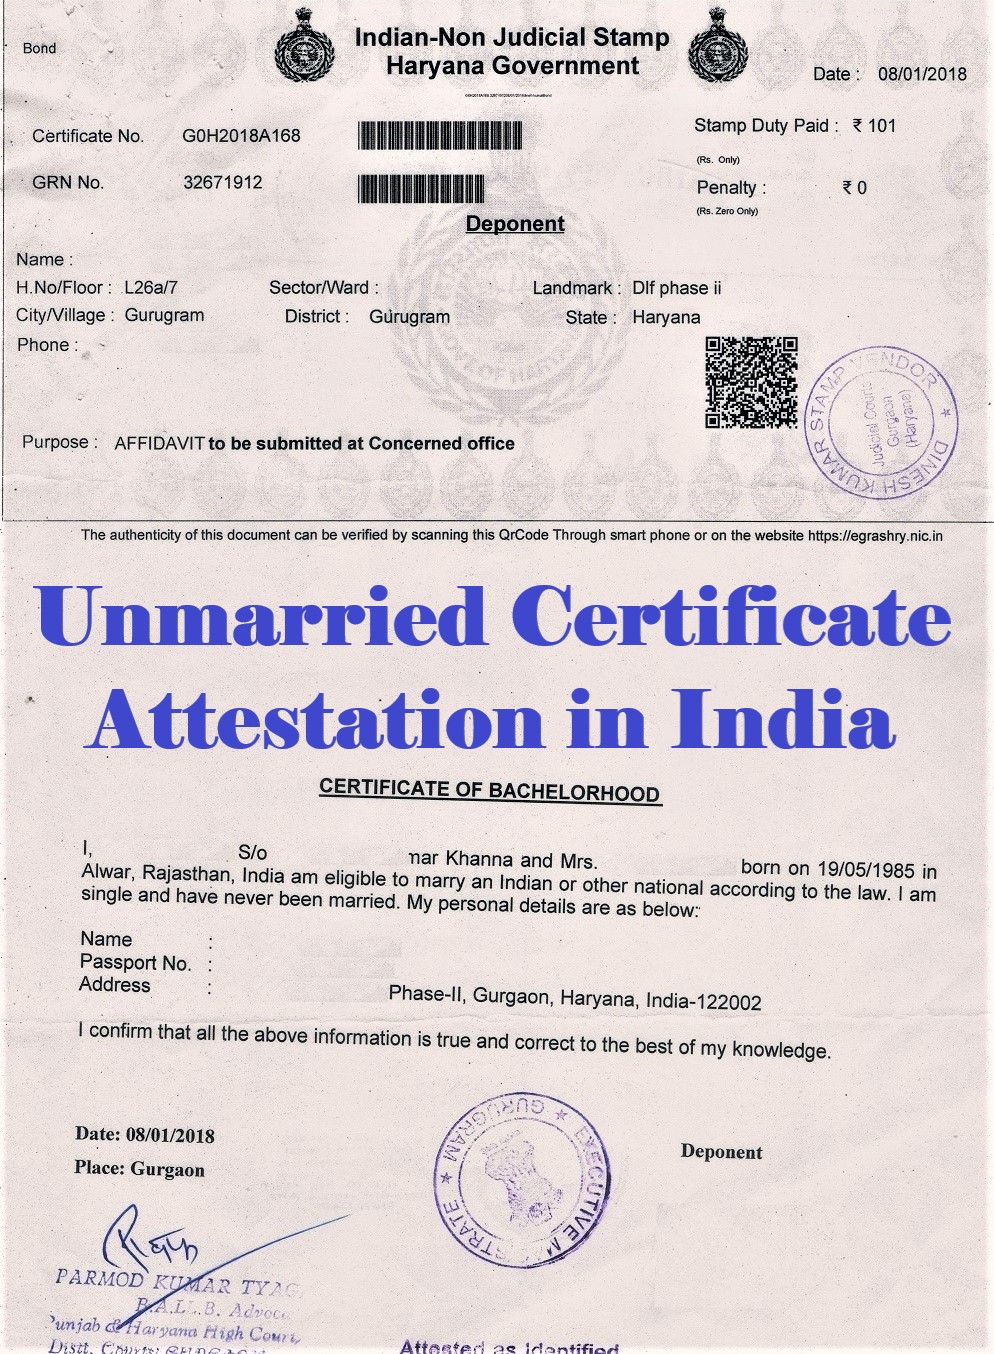 Unmarried Certificate Attestation from Angola Embassy